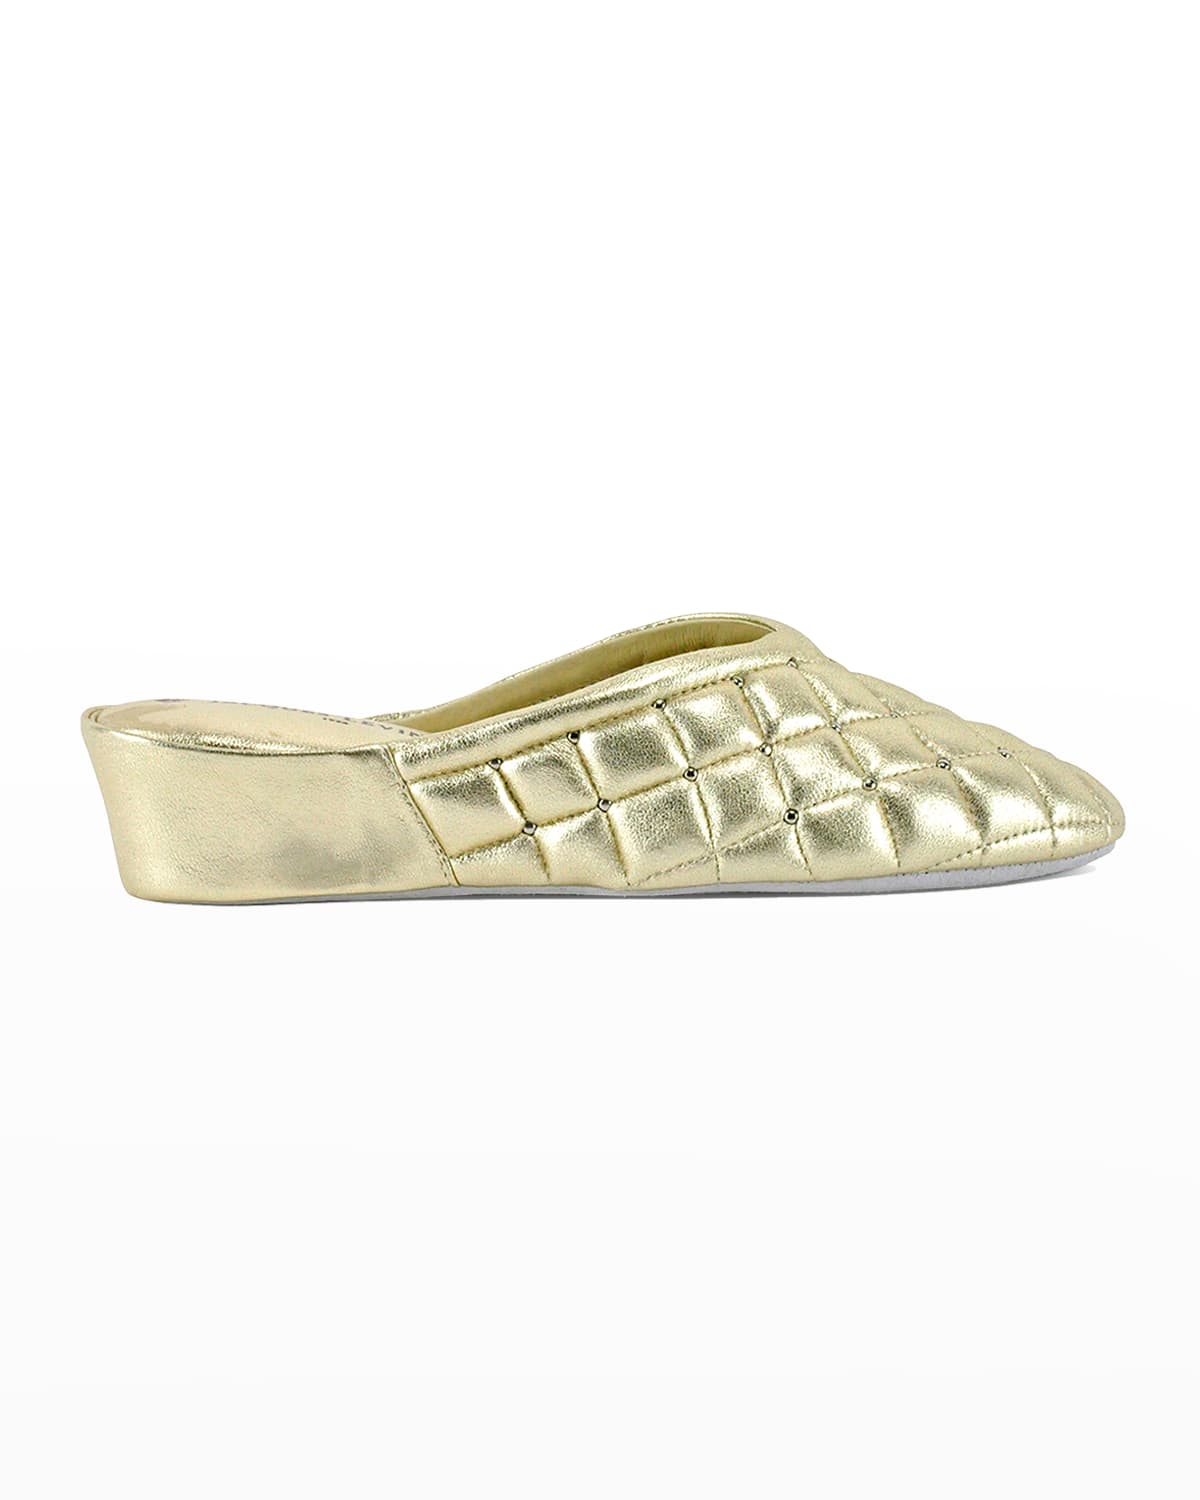 Jacques Levine Quilted Leather Studded Slippers In Gold/silver